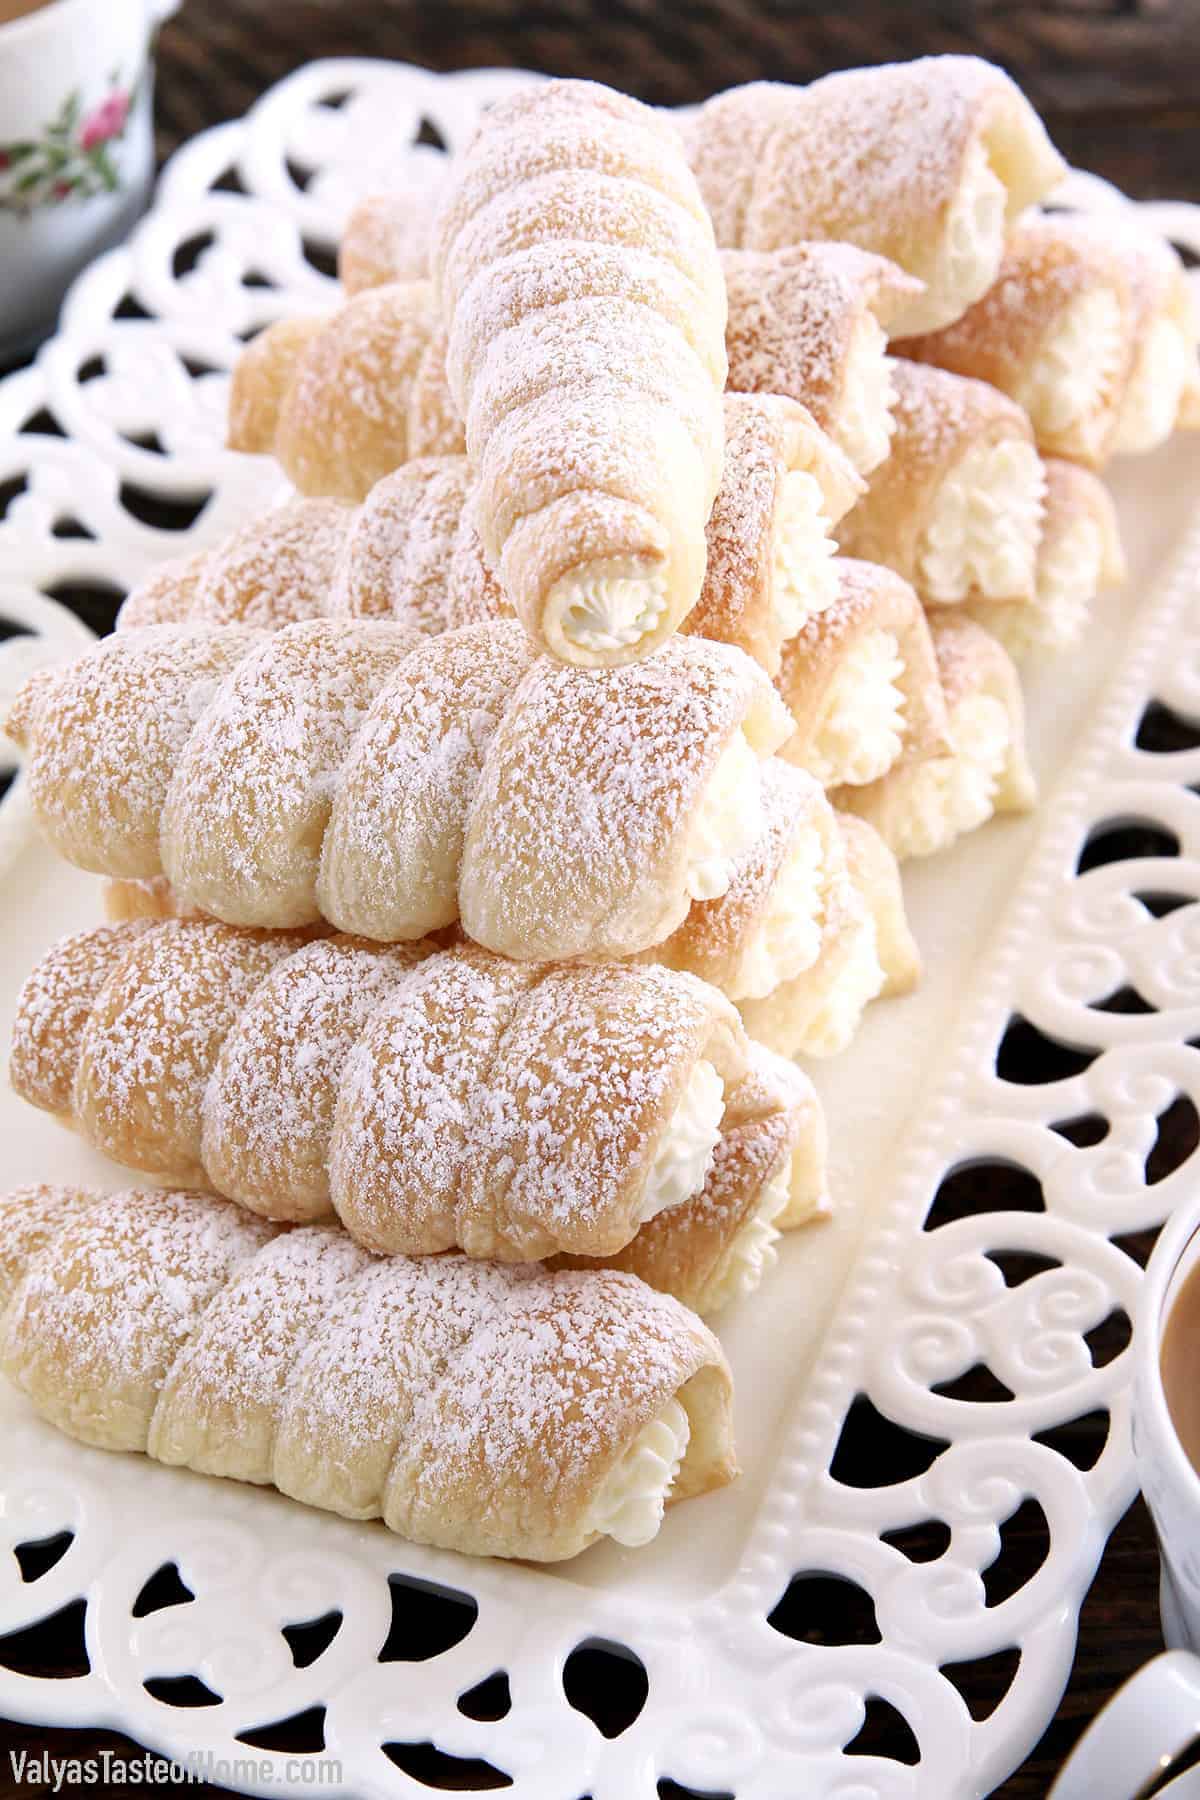 These classic cream horns are one of the most loved recipes by my whole family, my absolute favorite pastry, and very well-loved by you as well! The ingredients are so simple. 